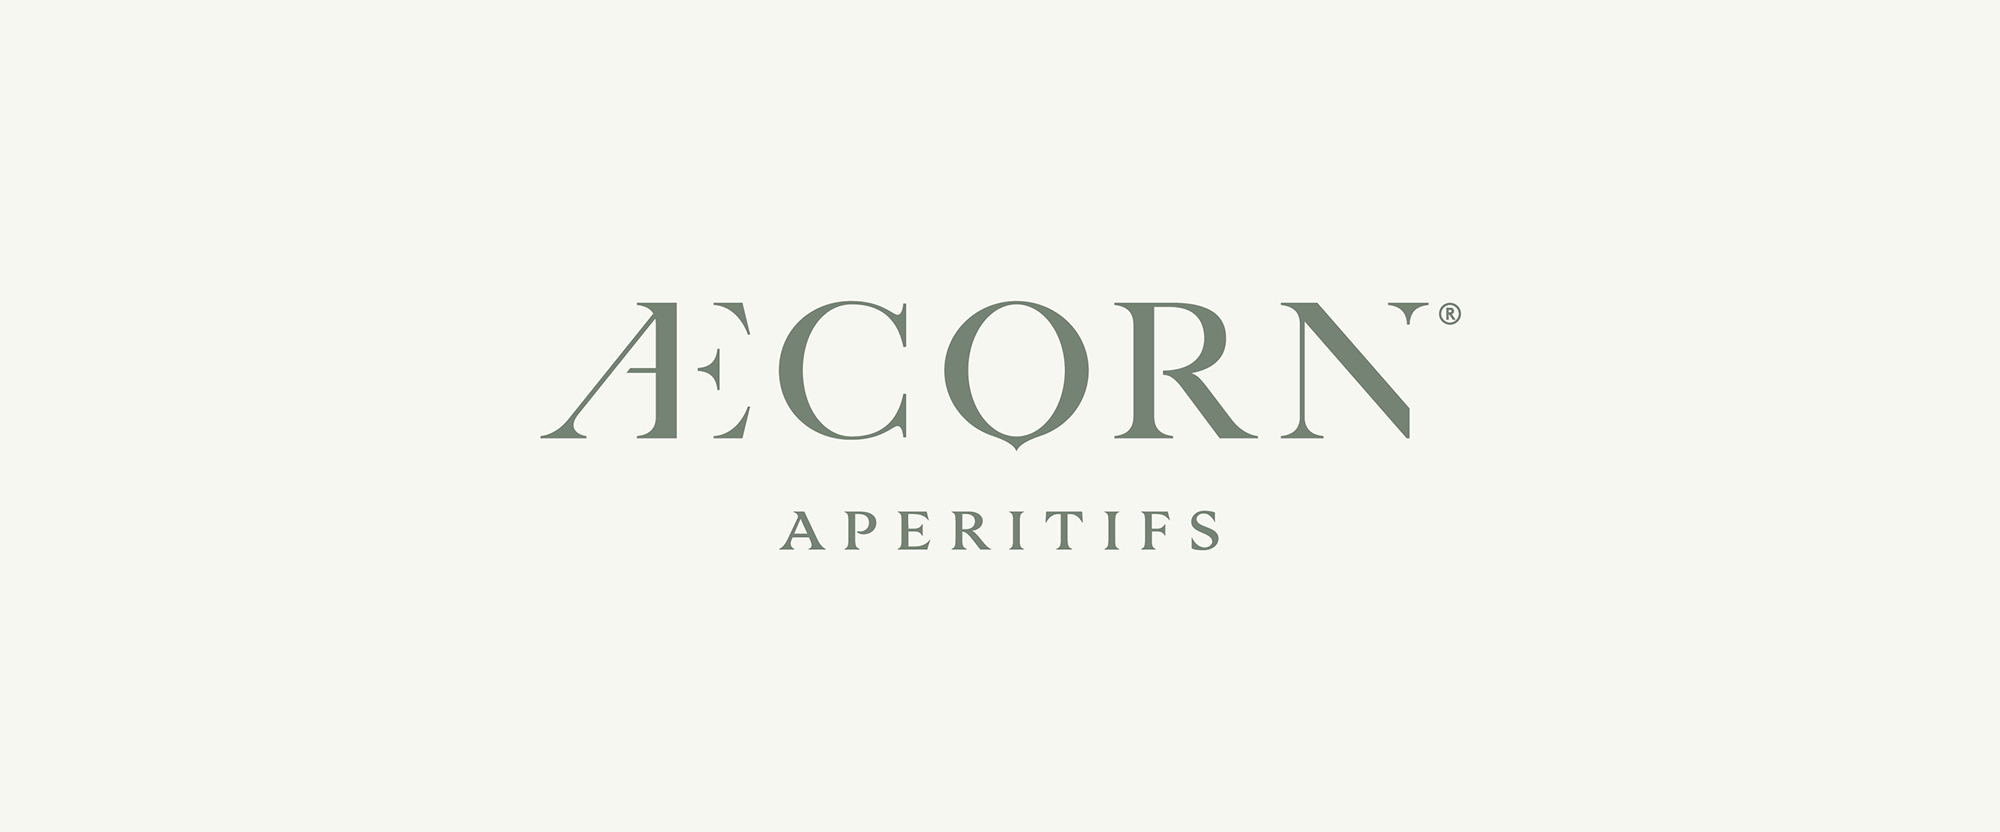 New Logo and Packaging for Æcorn Aperitifs by Pearlfisher